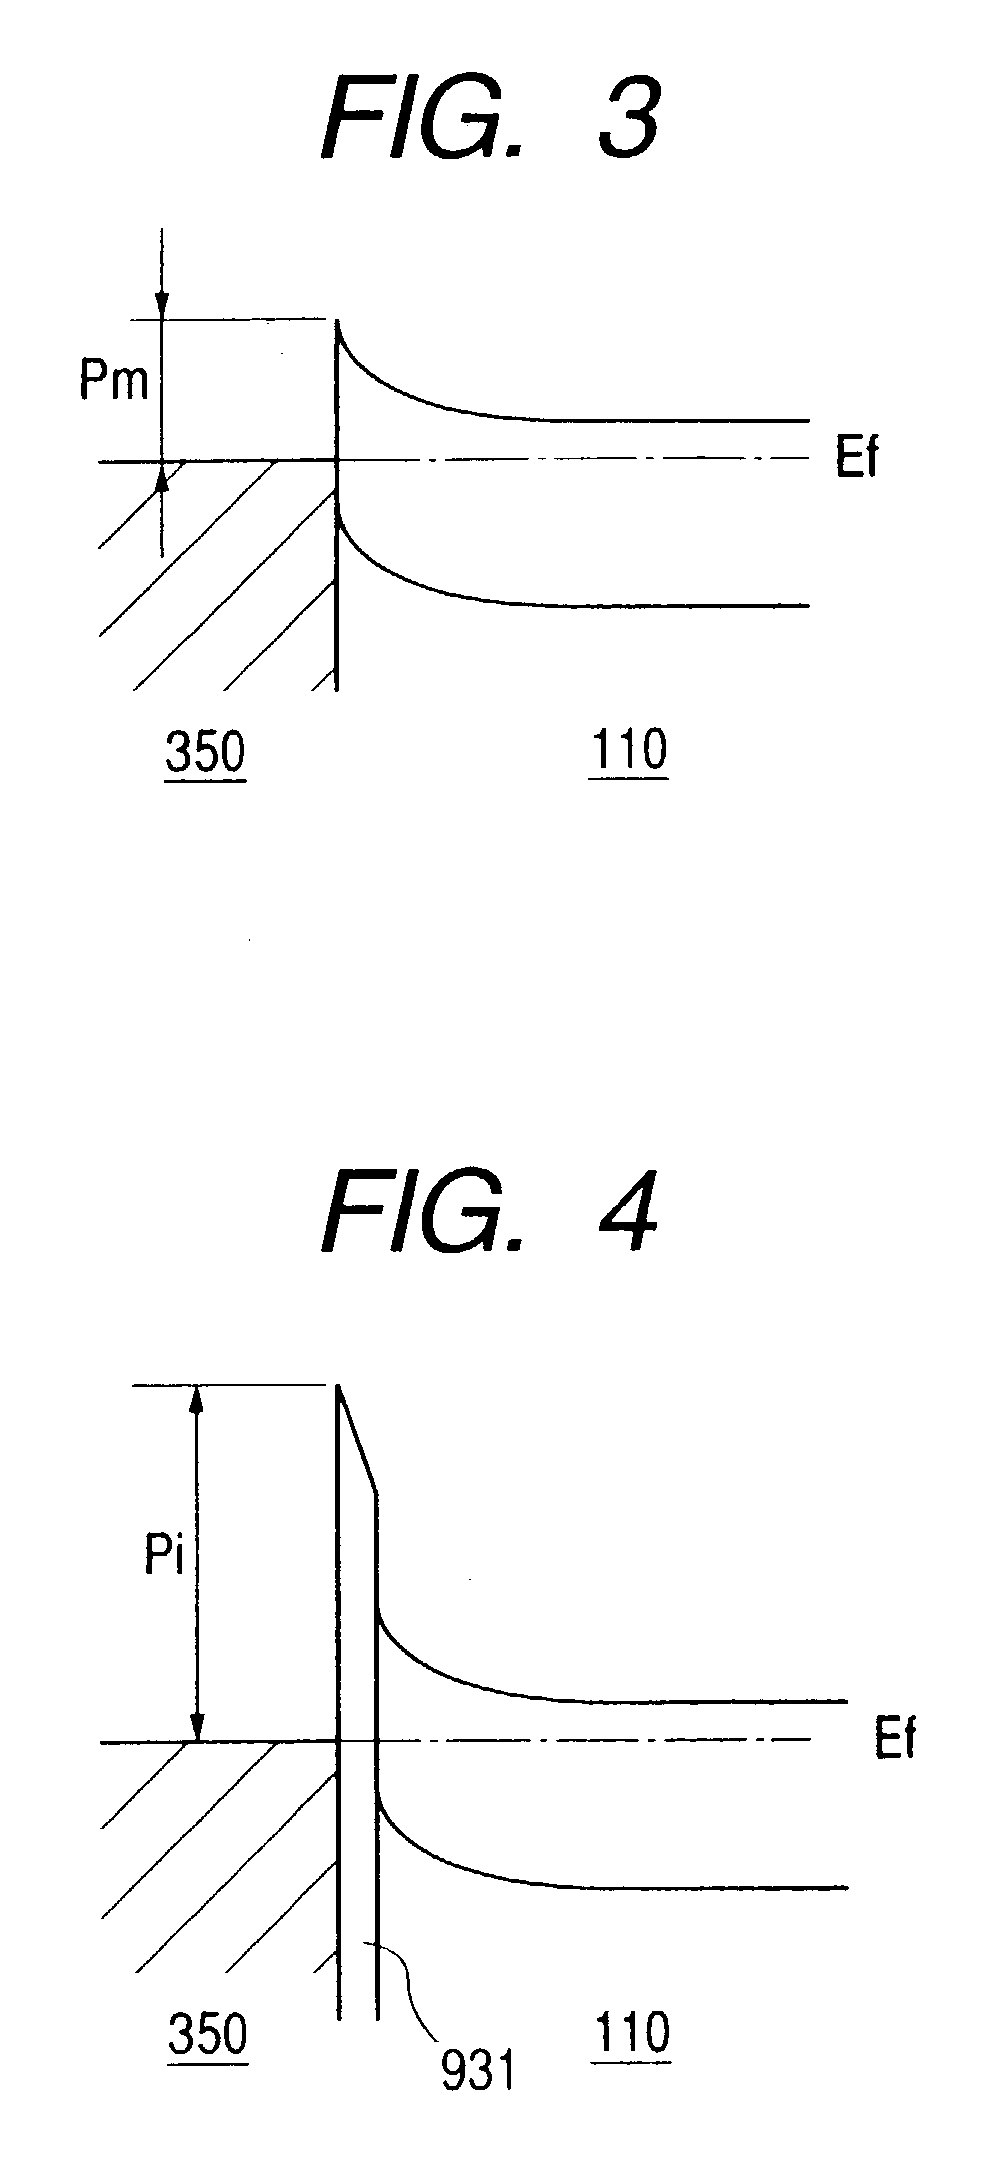 Vertical semiconductor device with tunnel insulator in current path controlled by gate electrode